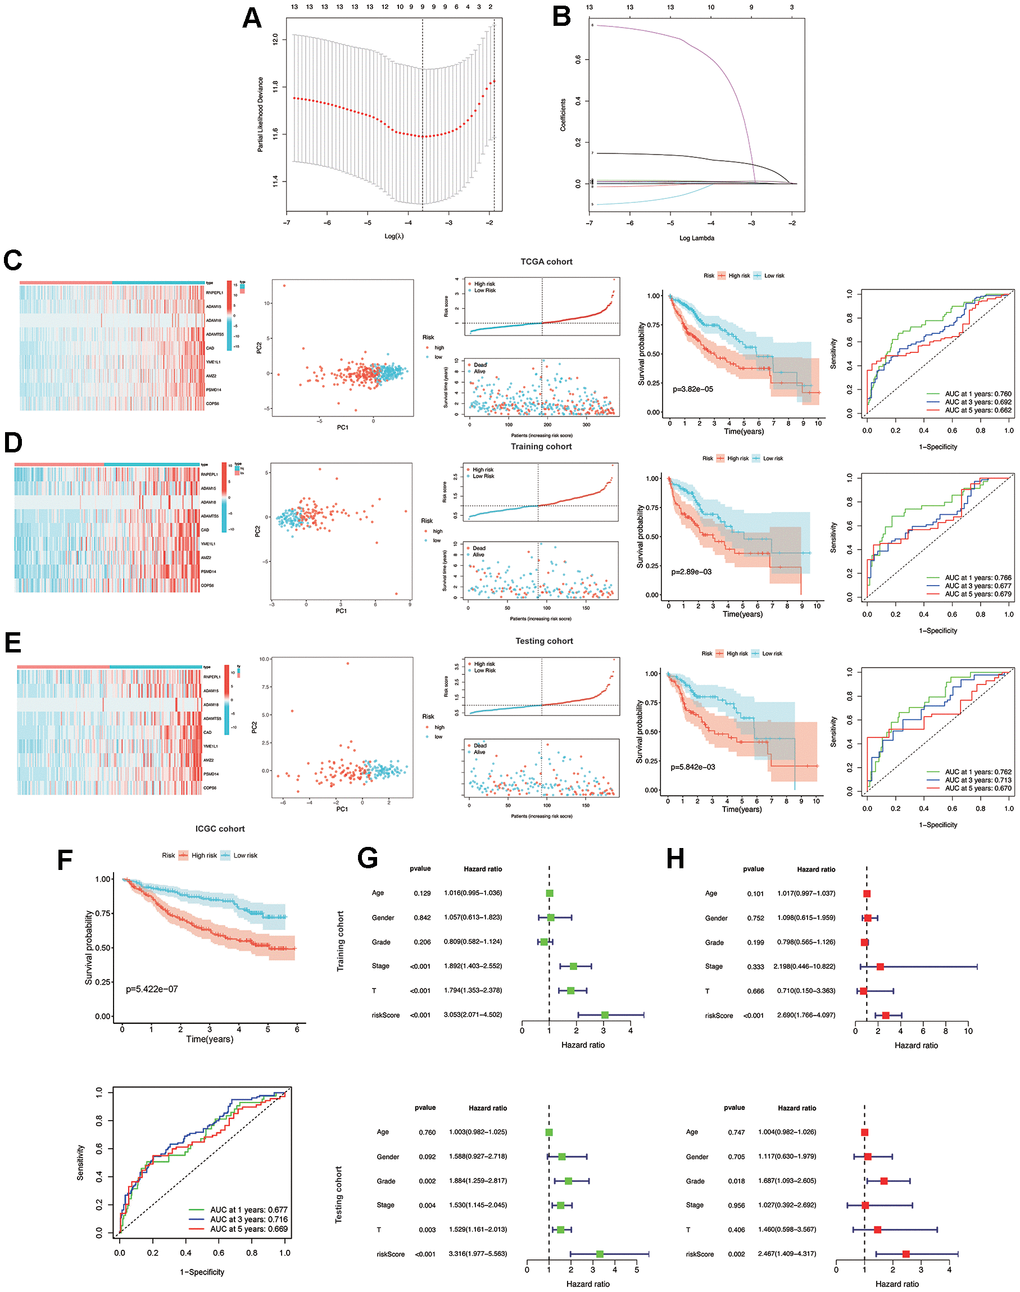 Construction and validation of the MMPs-related prognostic signature. (A) LASSO regression with tenfold cross-validation found nine prognostic genes using the minimum λ. (B) LASSO coefficient profiles of nine prognostic genes of HCC. (C, D) Heatmap, PCA plot, distribution, survival status, Kaplan-Meier curves for OS and ROC curves demonstrated the predictive efficiency of the risk score in entire, training, and testing cohorts. (E) Validation of the MMPs-related prognostic signature in the training cohort of TCGA-LIHC. (F) The validation of the MMPs-related prognostic signature in the ICGC-LIRI-JP cohort. (G) Univariate analysis of risk score and clinicopathological characteristics in the TCGA-LIHC training and testing cohorts. (H) Multivariate analysis of risk score and clinicopathological characteristics in the TCGA-LIHC training and testing cohorts.